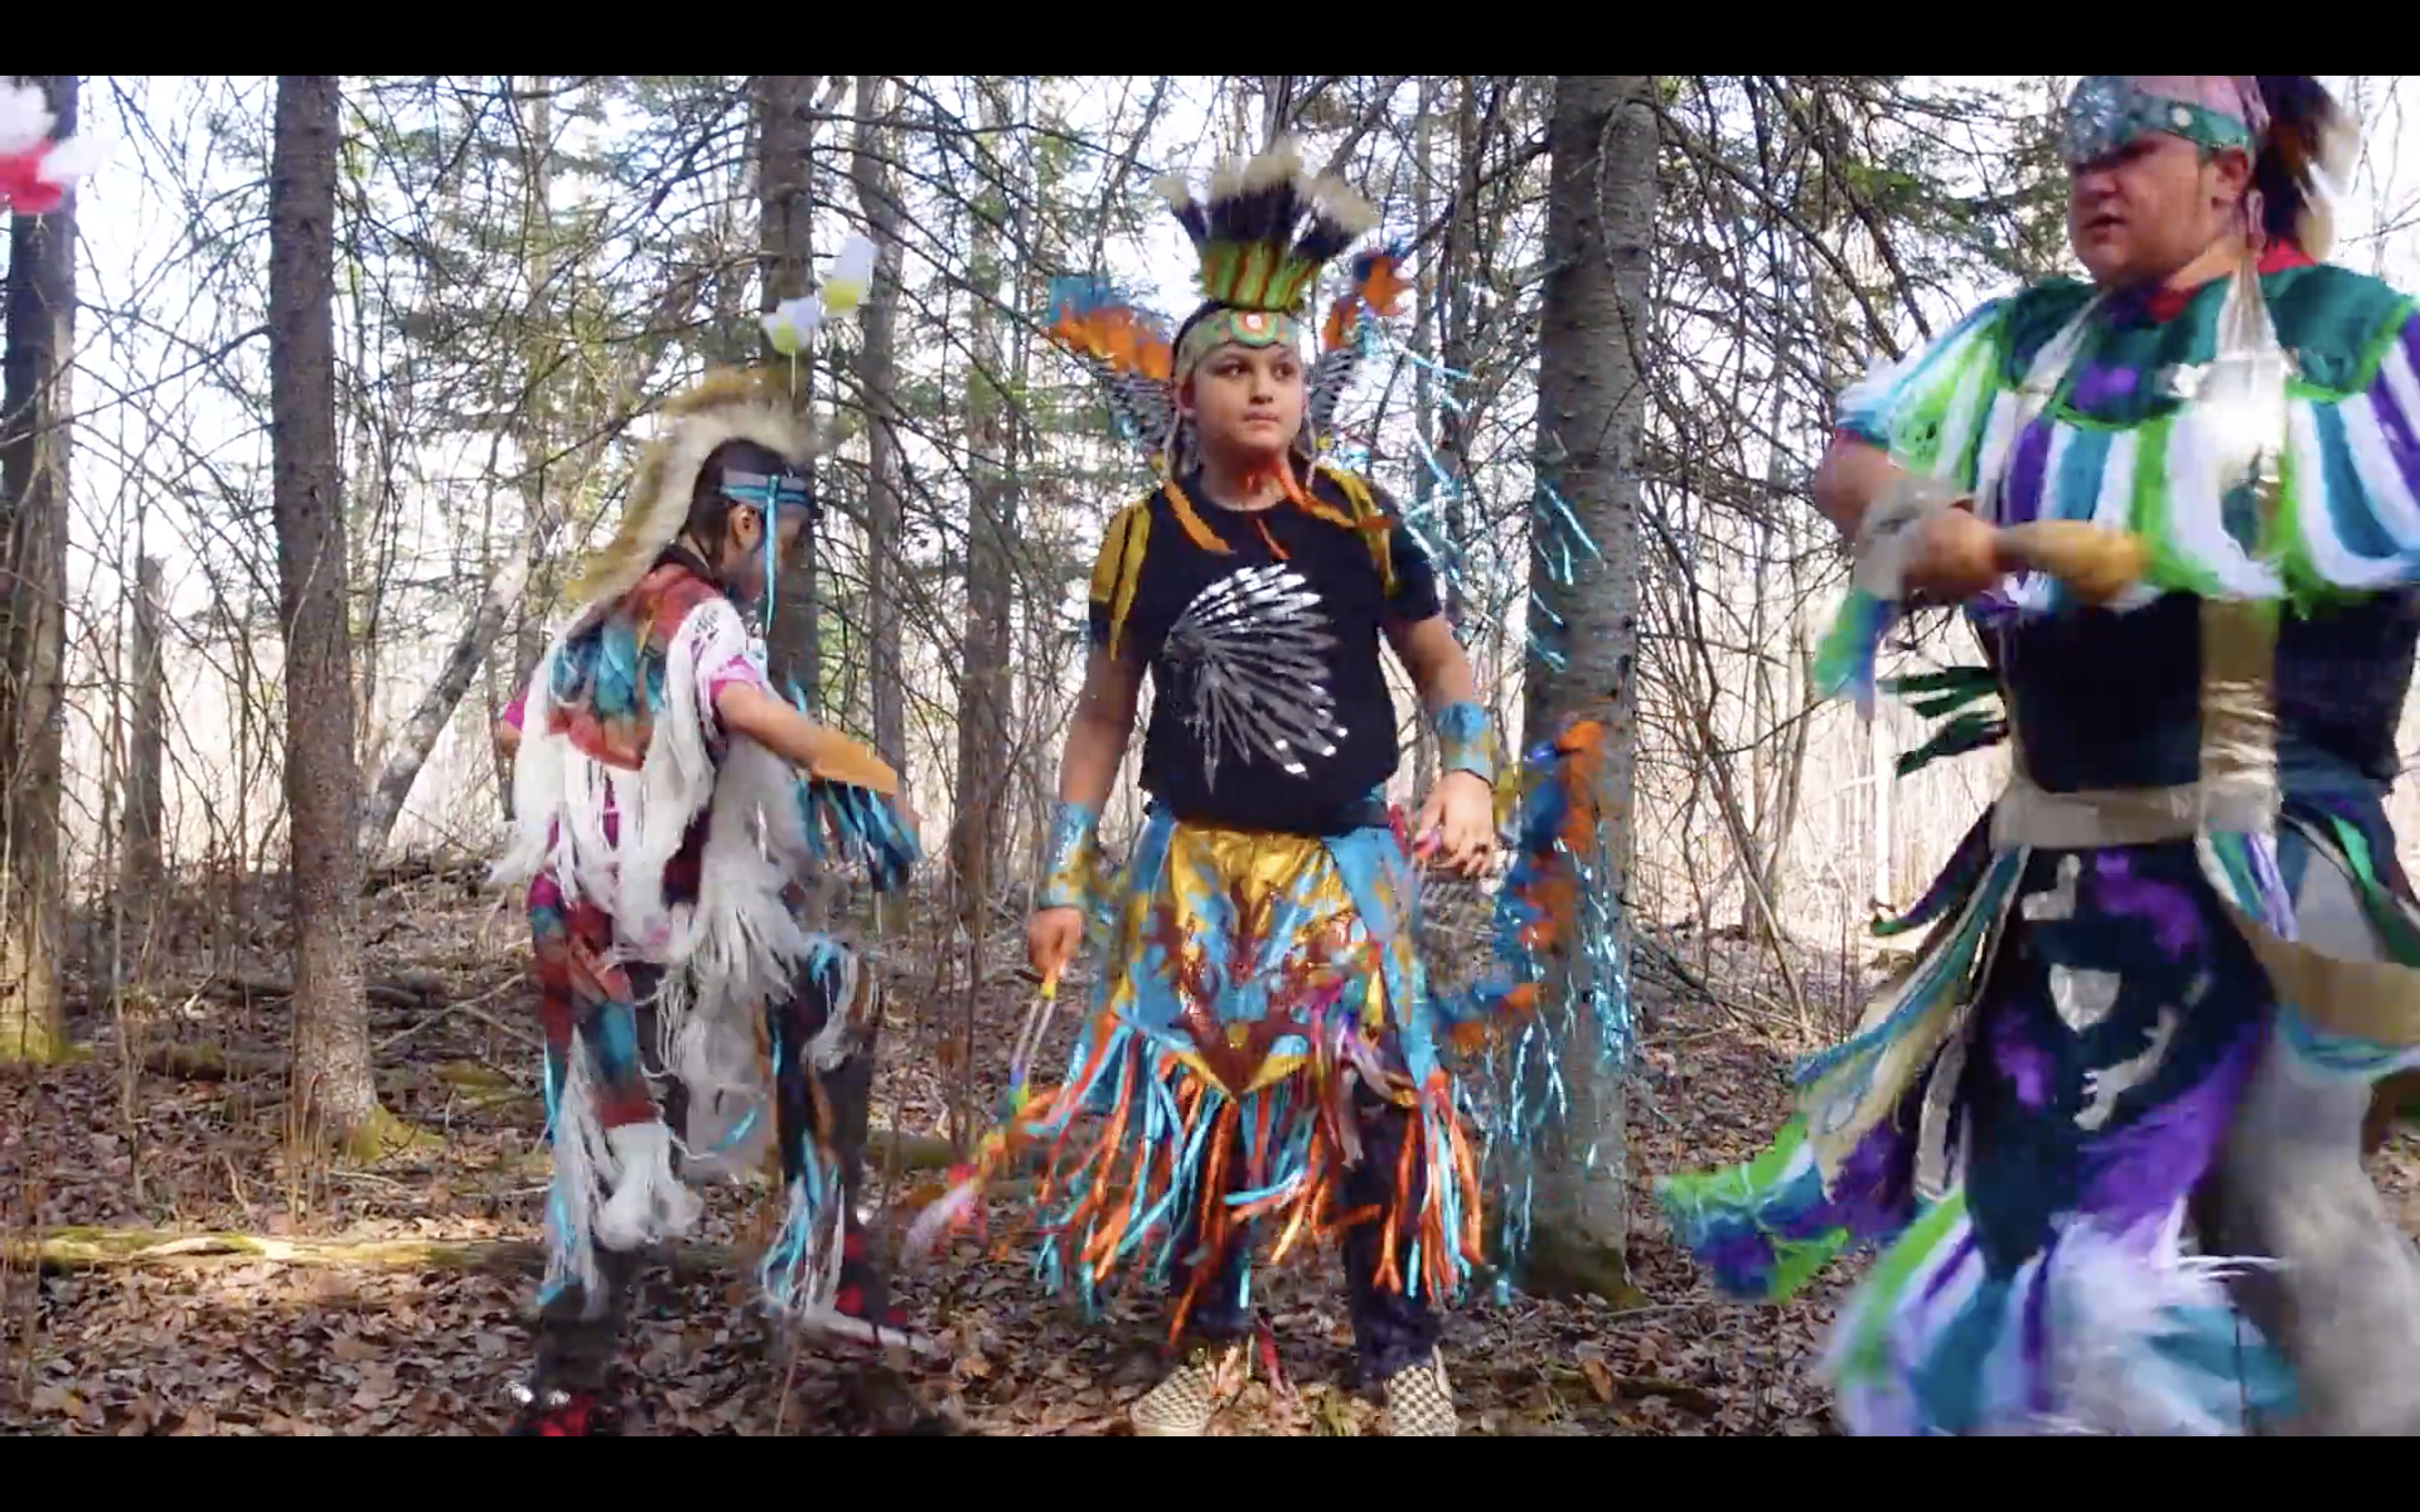 This is an image of three young Indigenous boys. They are all dressed in regalia and dancing in a forest. The boys on the left and right are dressed in colourful grass dance regalia, and the boy in the centre is dressed in fancy dance regalia.